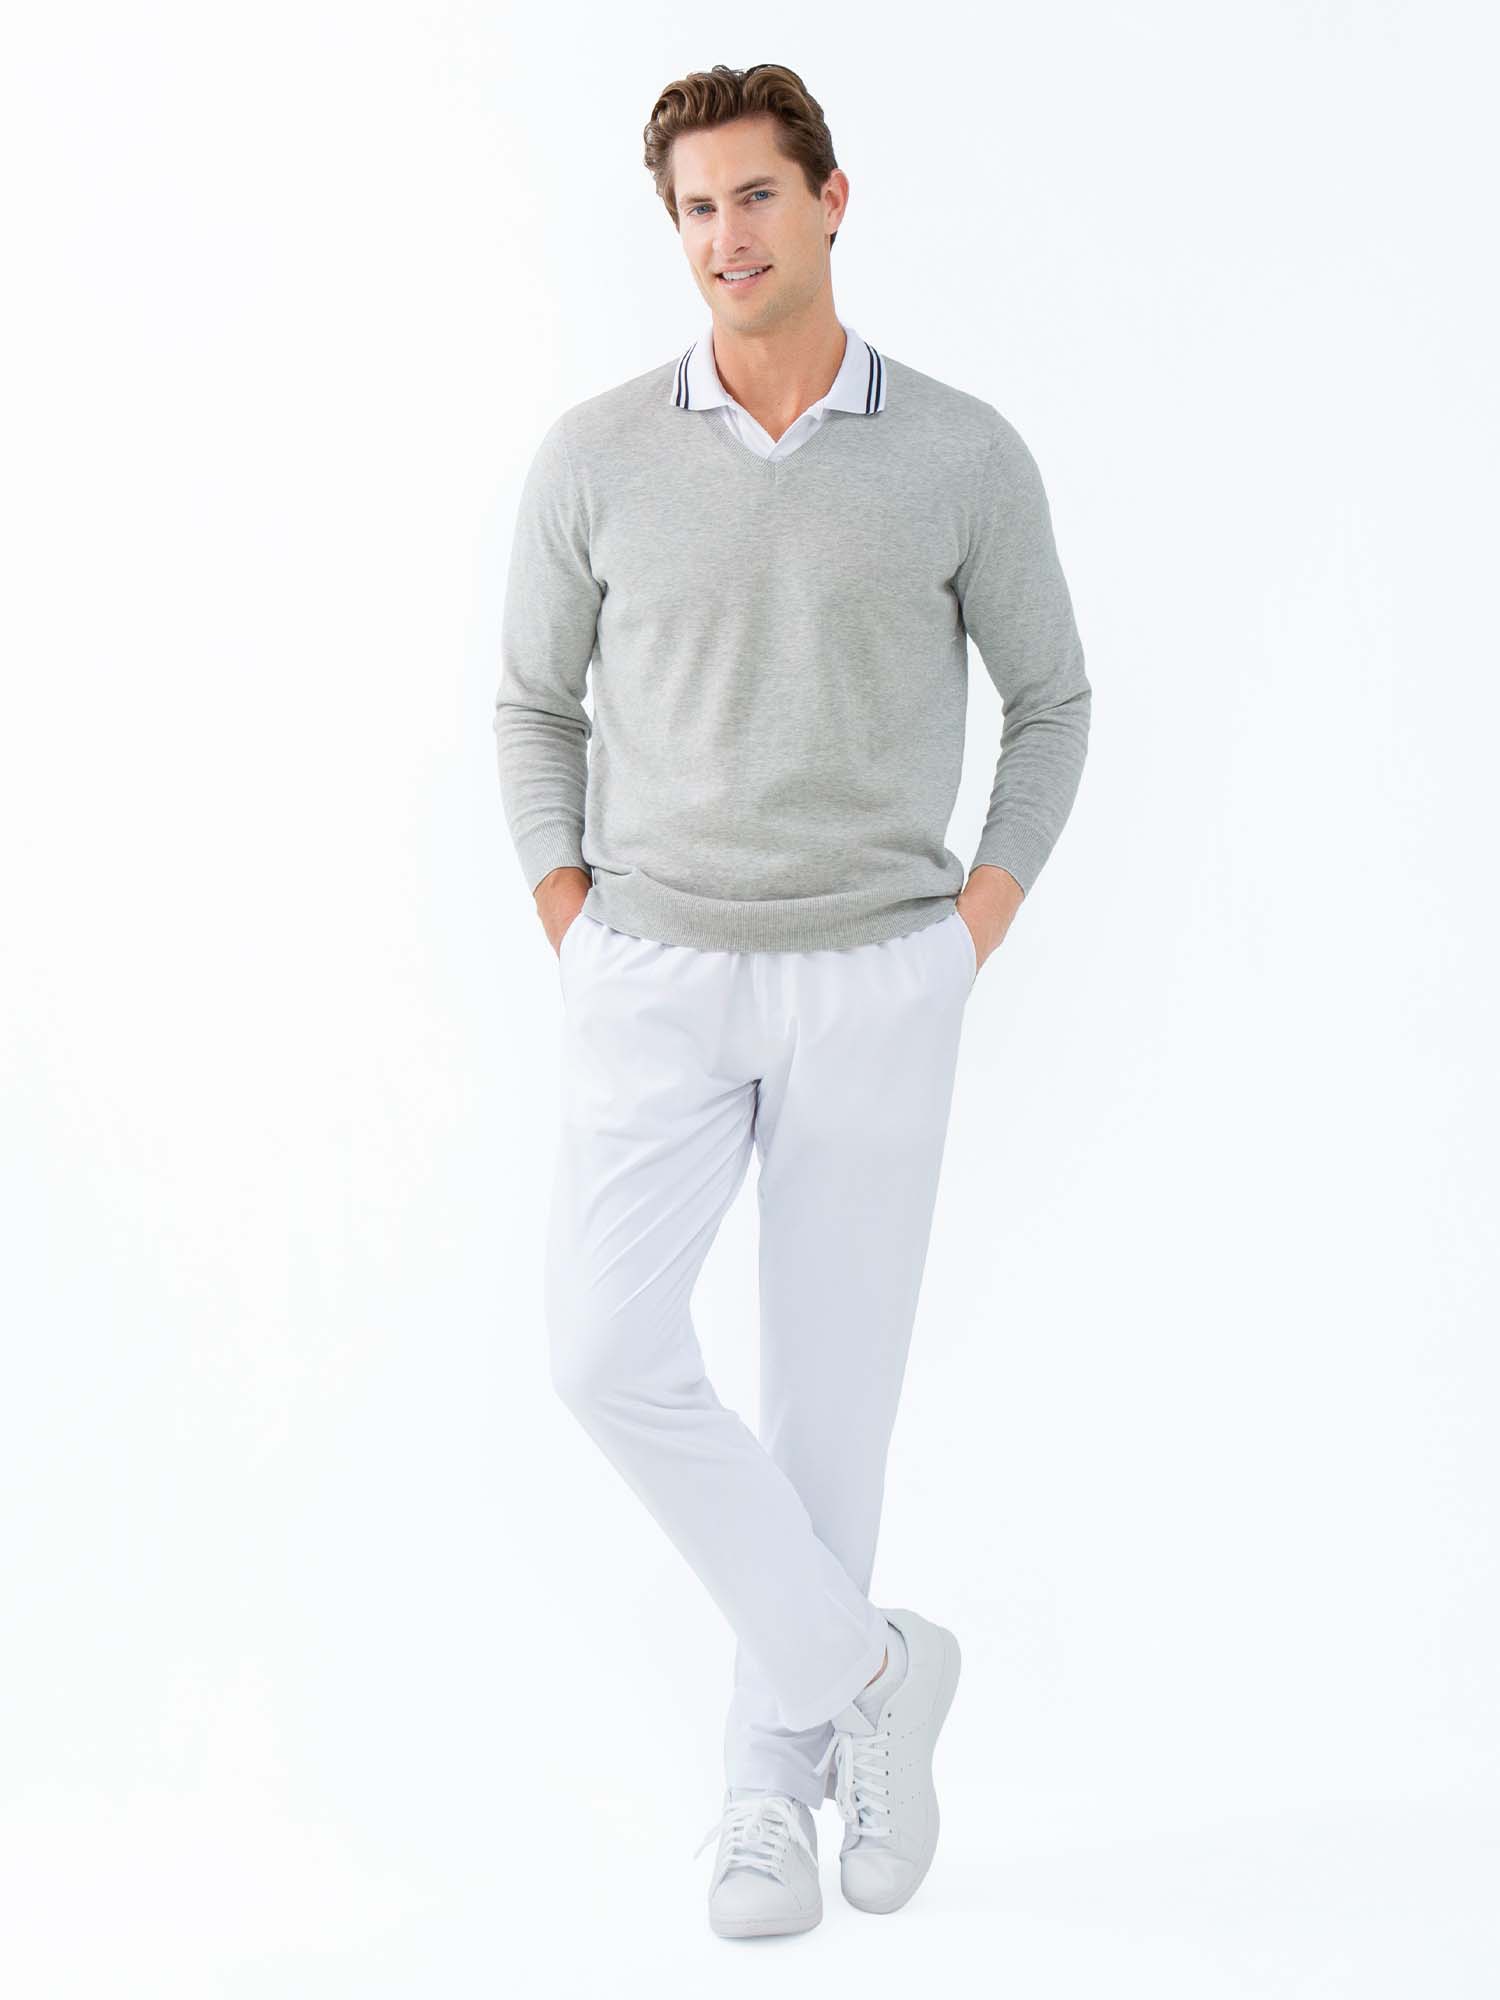 Classic V Neck Sweater - Light Heaher